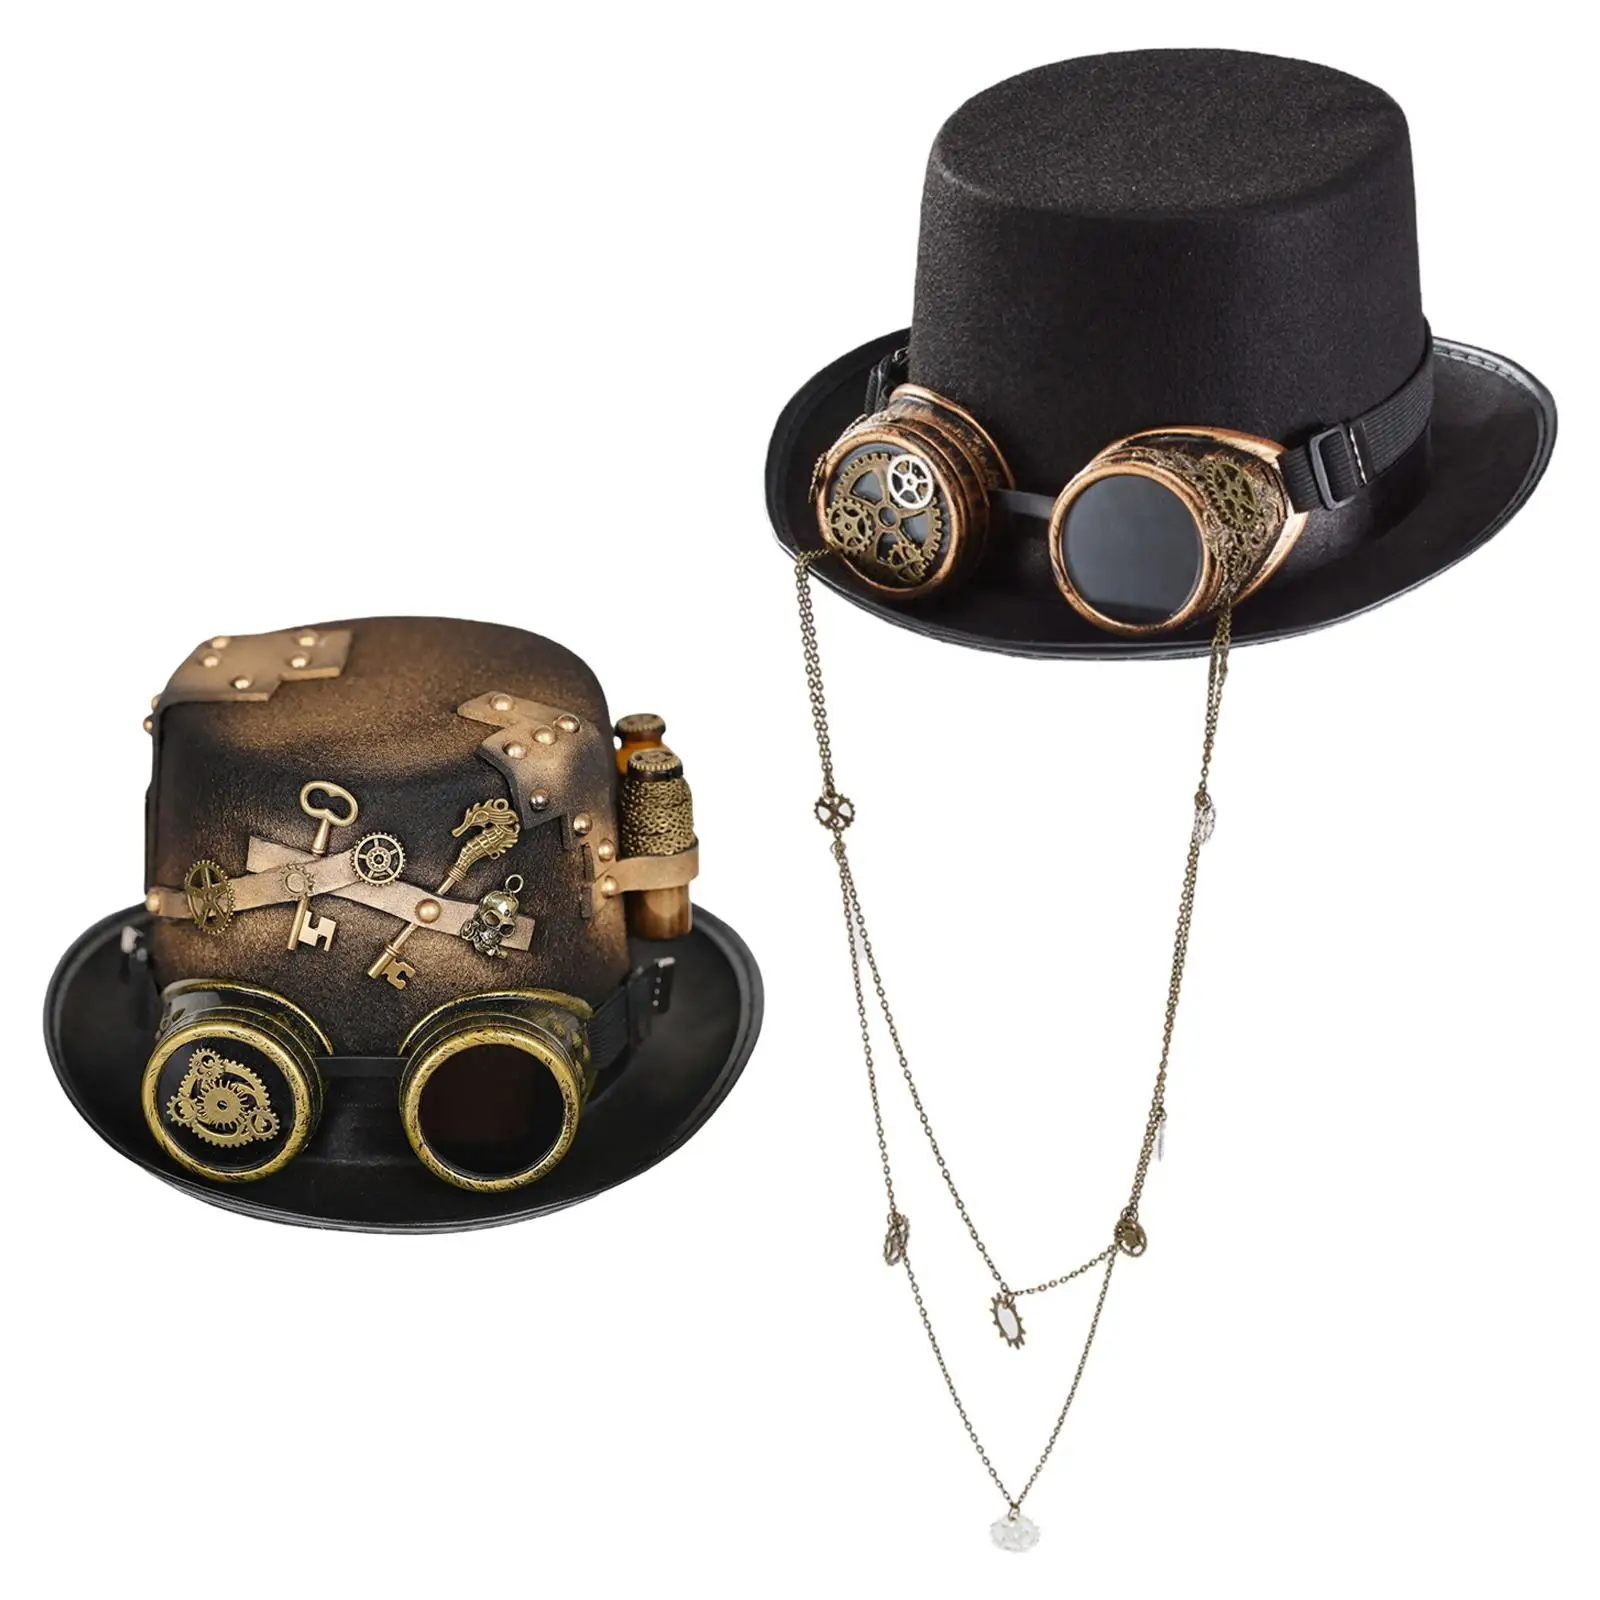 Retro 2 Pieces Gothic Steampunk Top Hat with Goggles, Unisex Industrial Age Head Circumference 56-60cm Gift Renaissance Costume